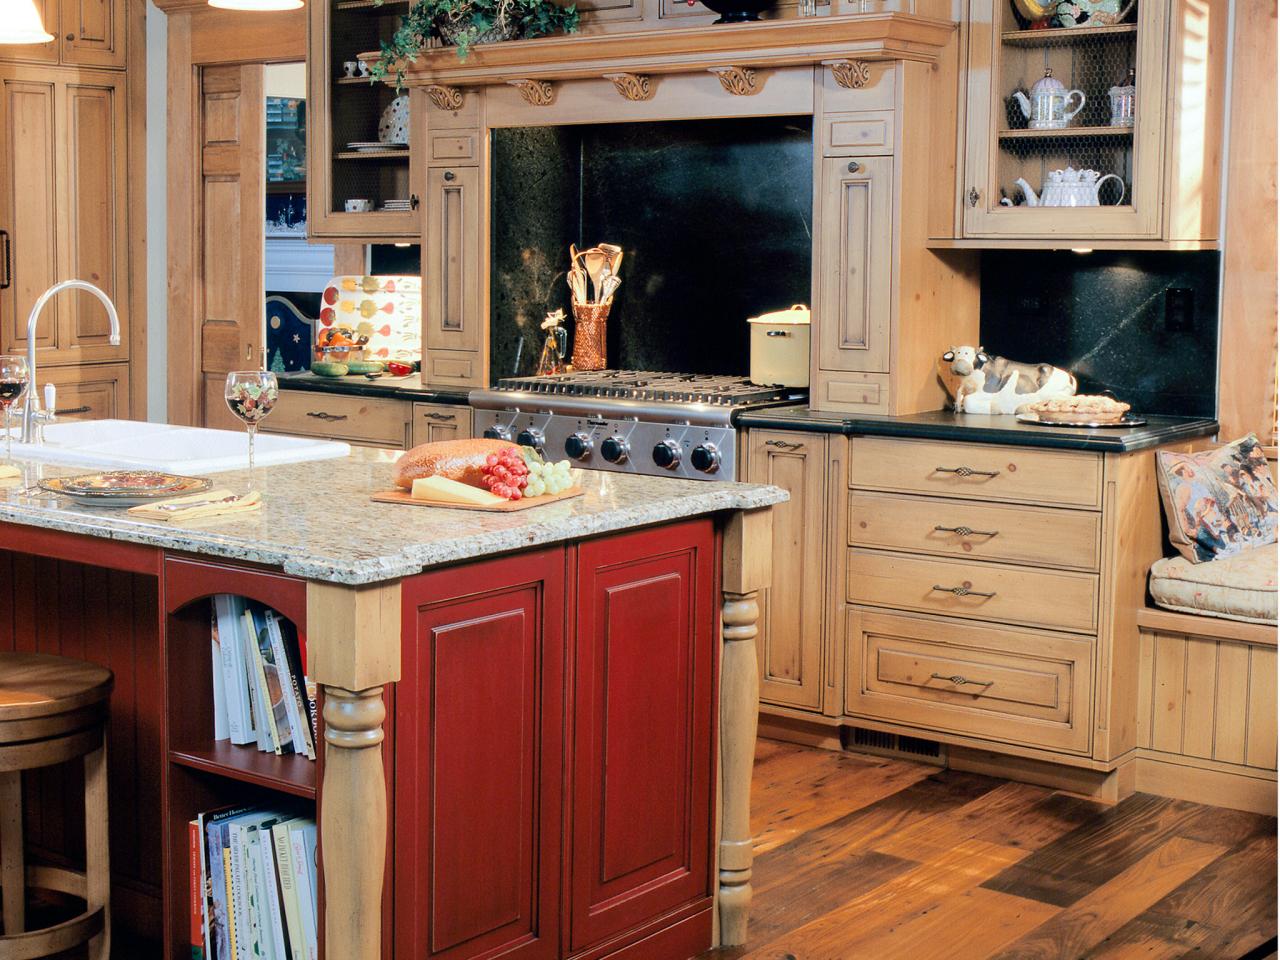 Staining Kitchen Cabinets Pictures, How To Change The Color Of Stain On Your Kitchen Cabinets